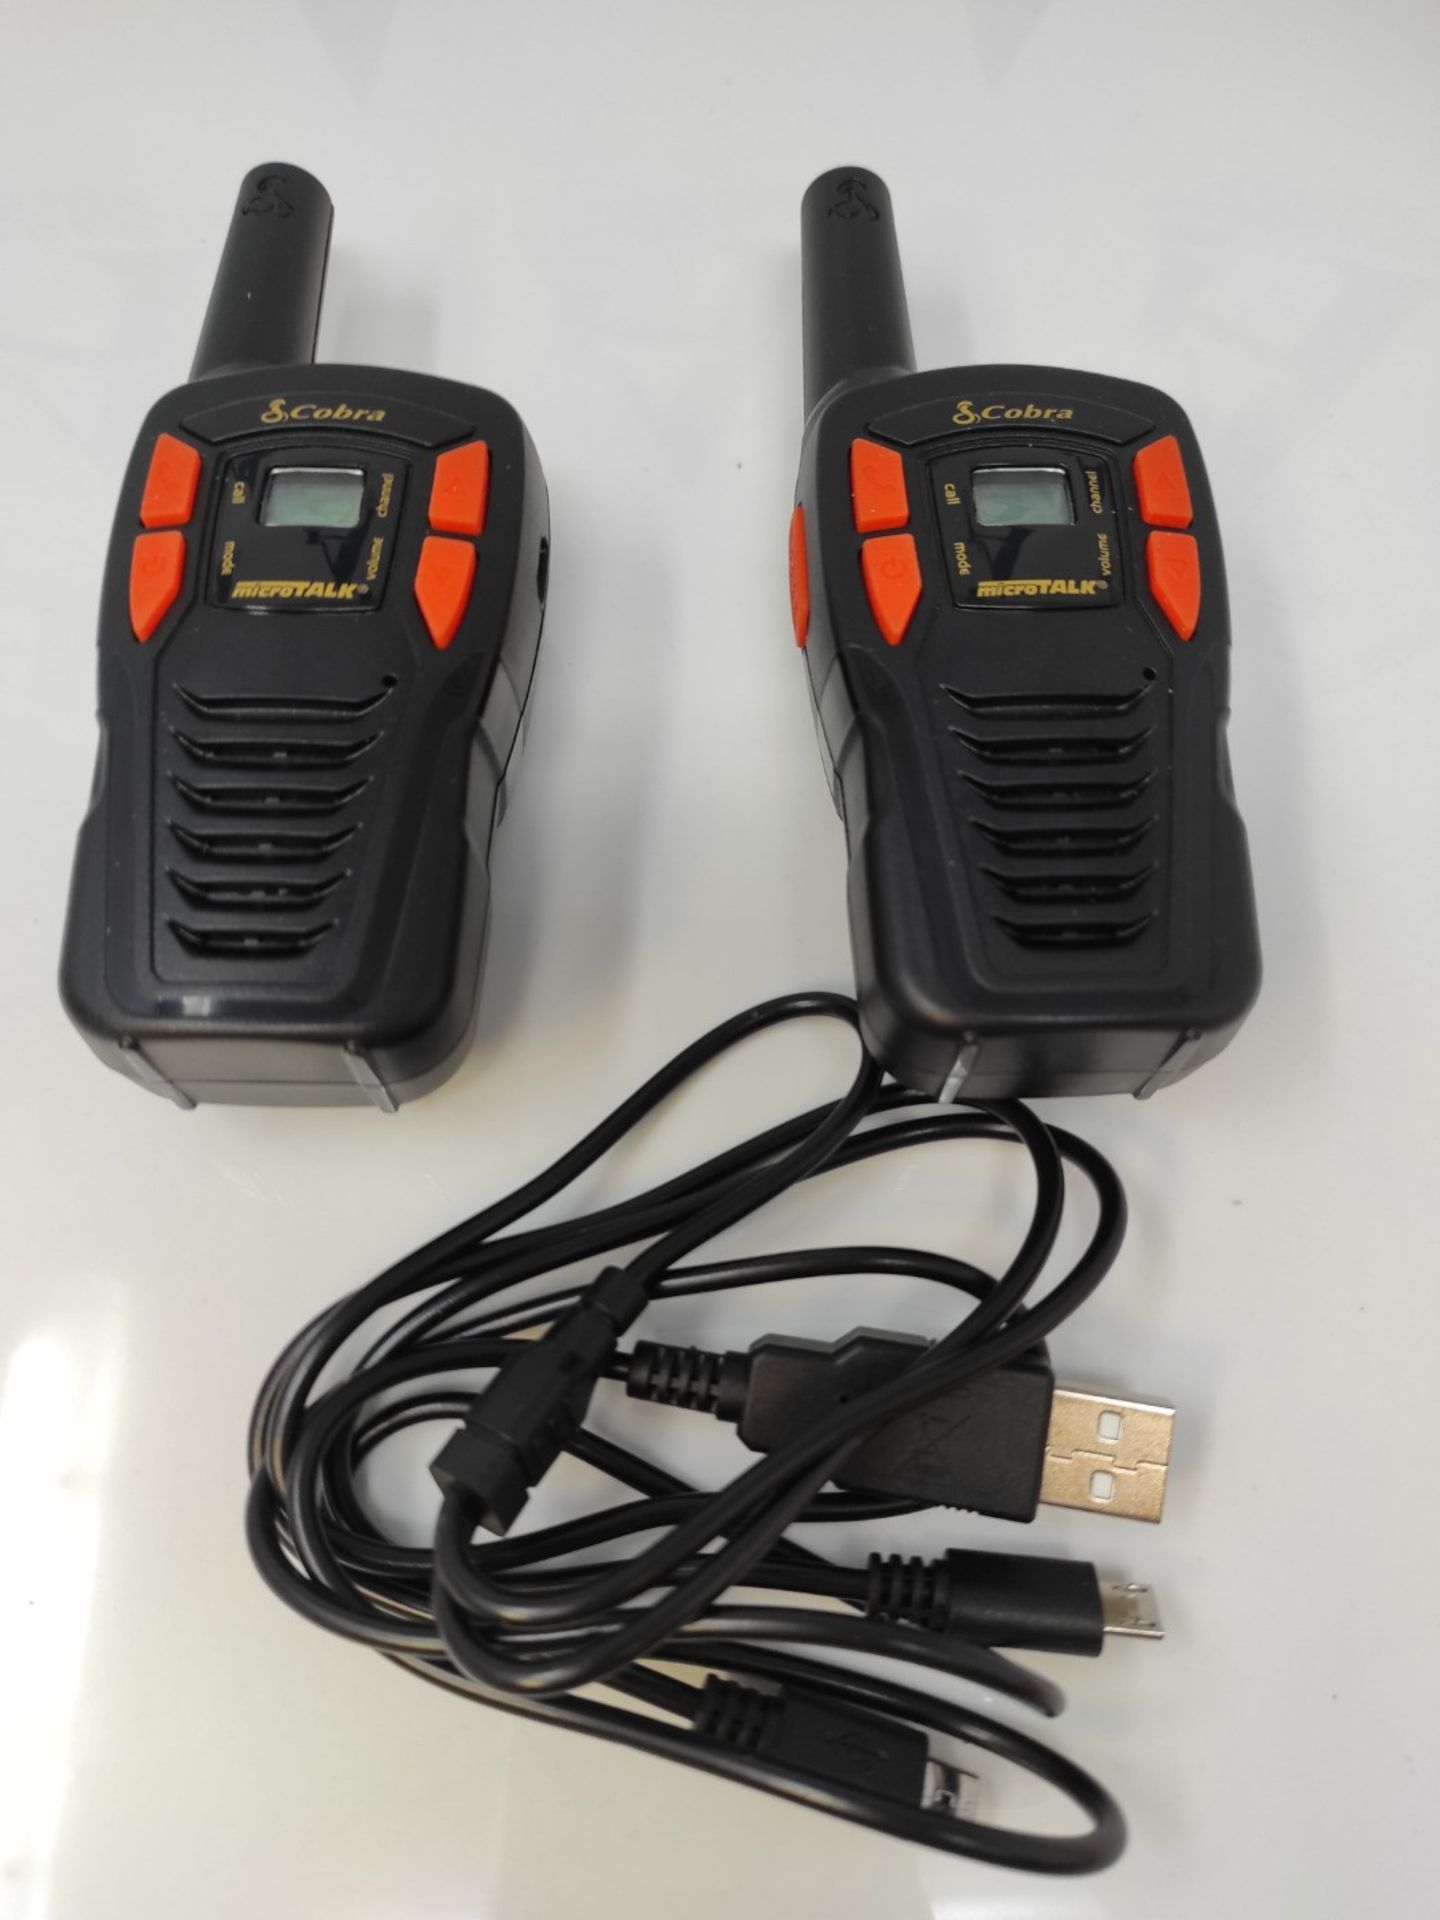 Cobra AM245 Lightweight Walkie Talkie with up to 5Km Range, Power Saving Function and - Image 2 of 2